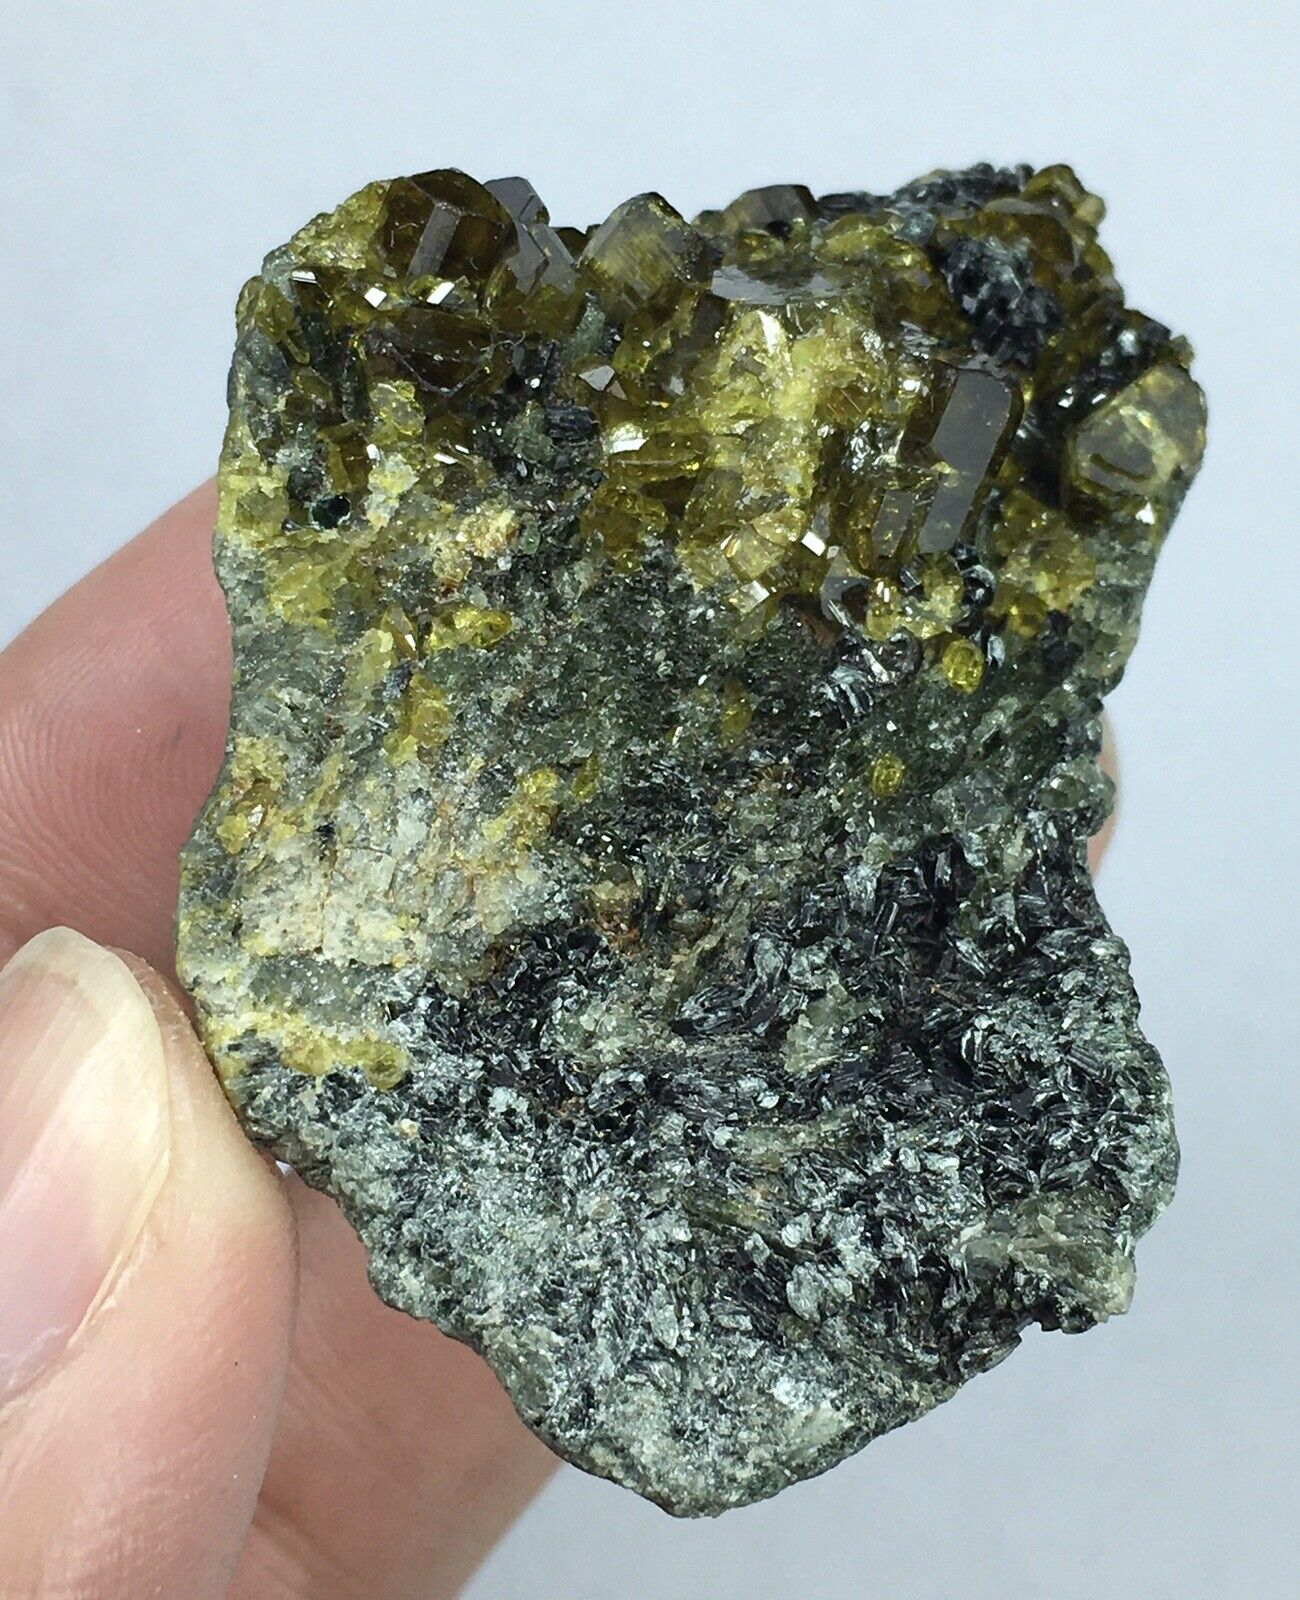 Epidote Cluster with clinochlore mica